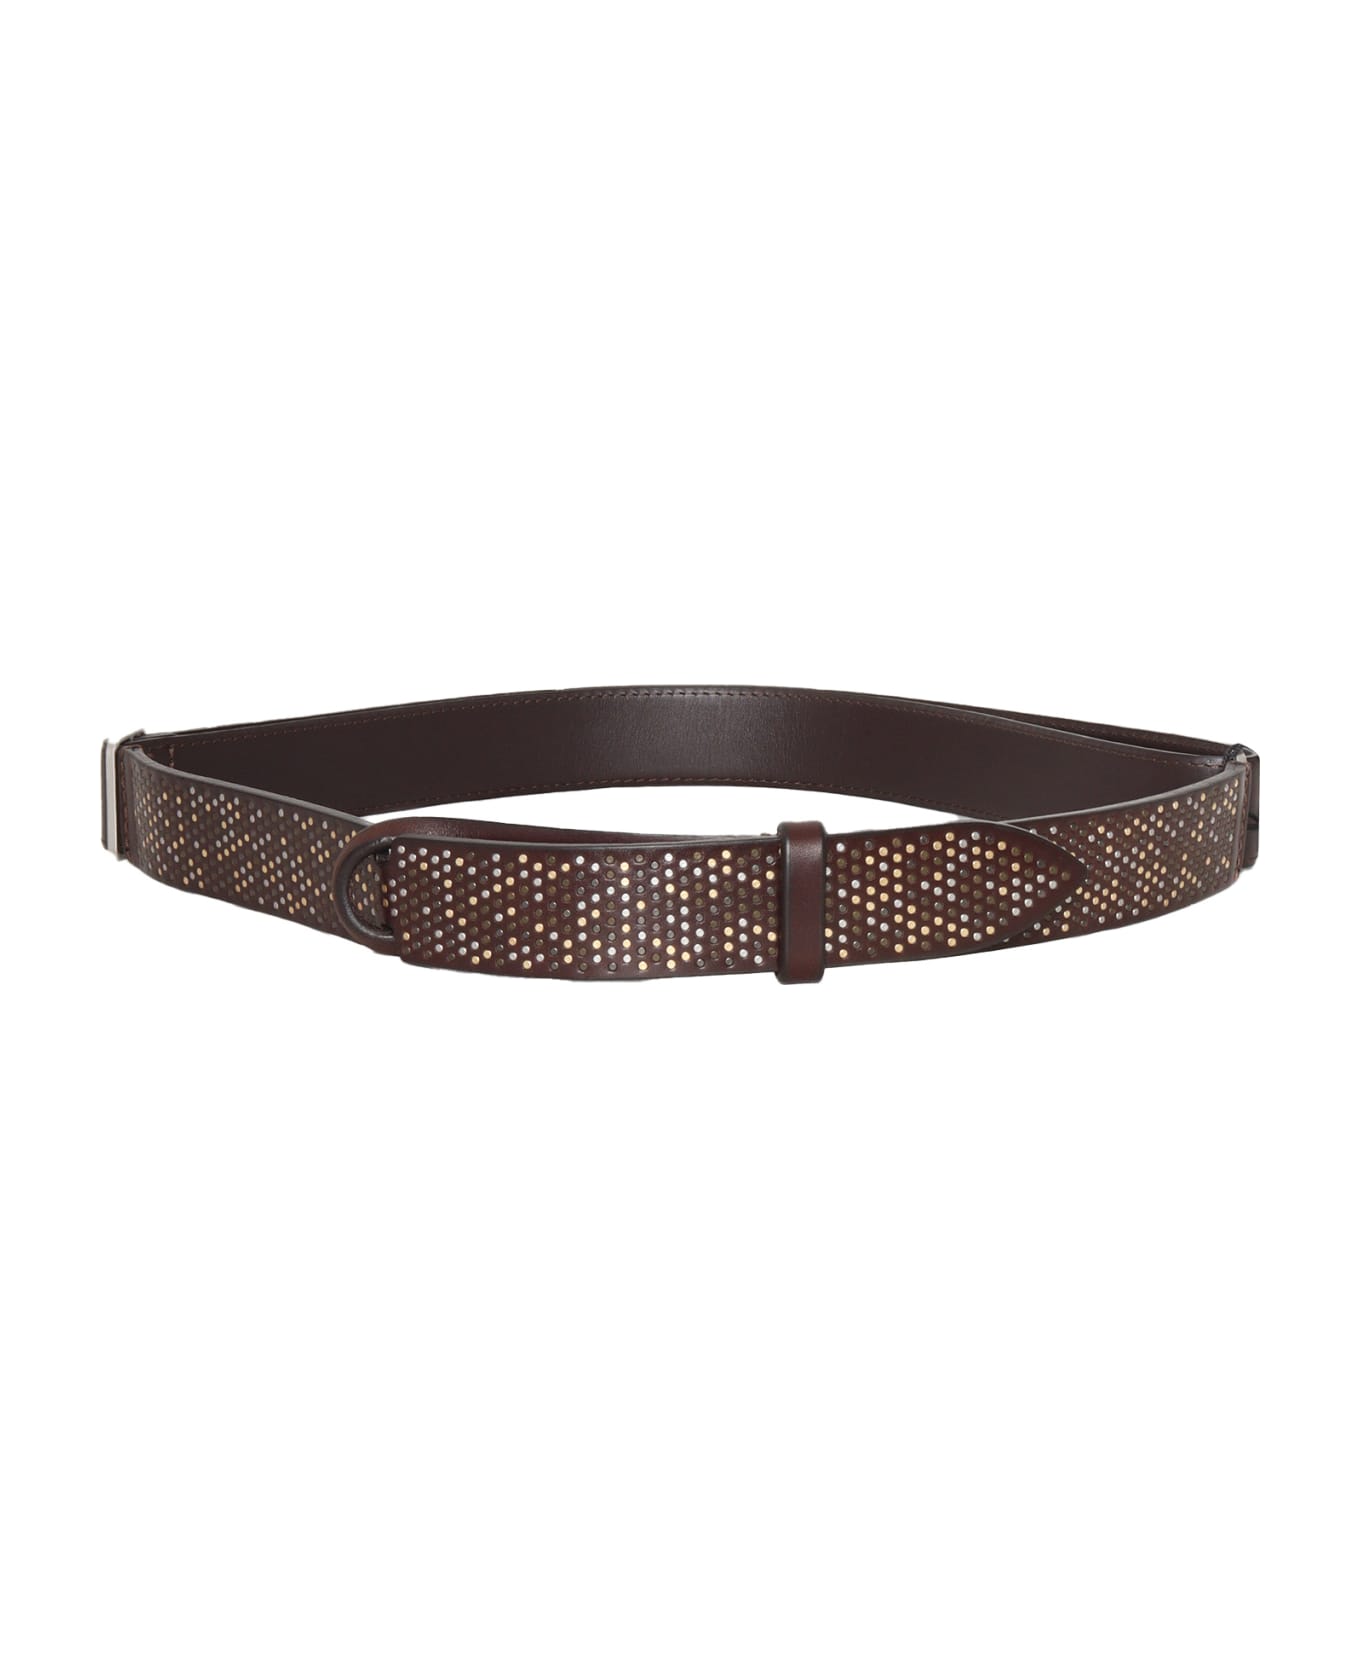 Orciani Men's Leather Belt - BROWN